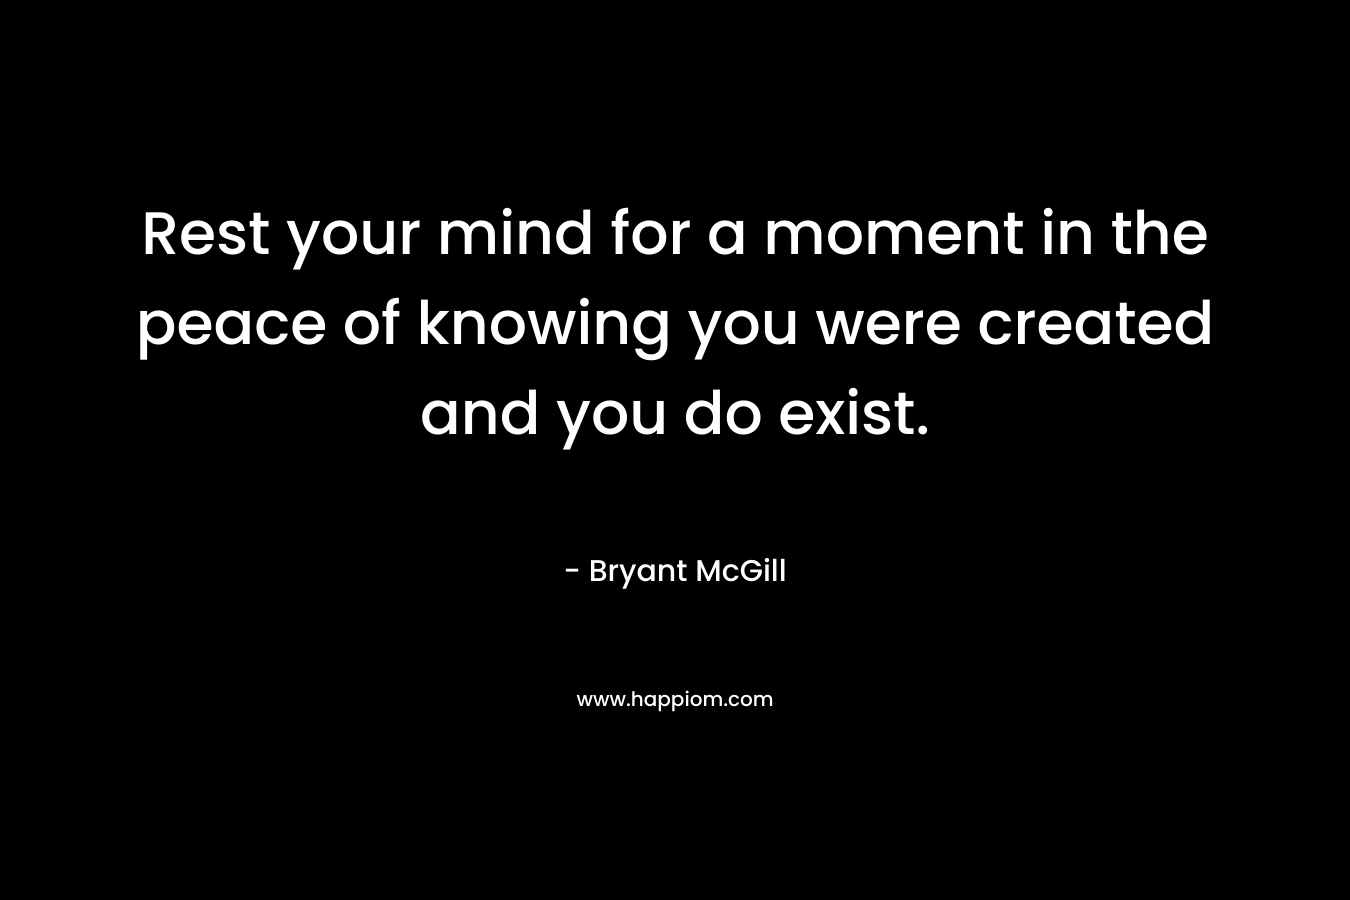 Rest your mind for a moment in the peace of knowing you were created and you do exist.